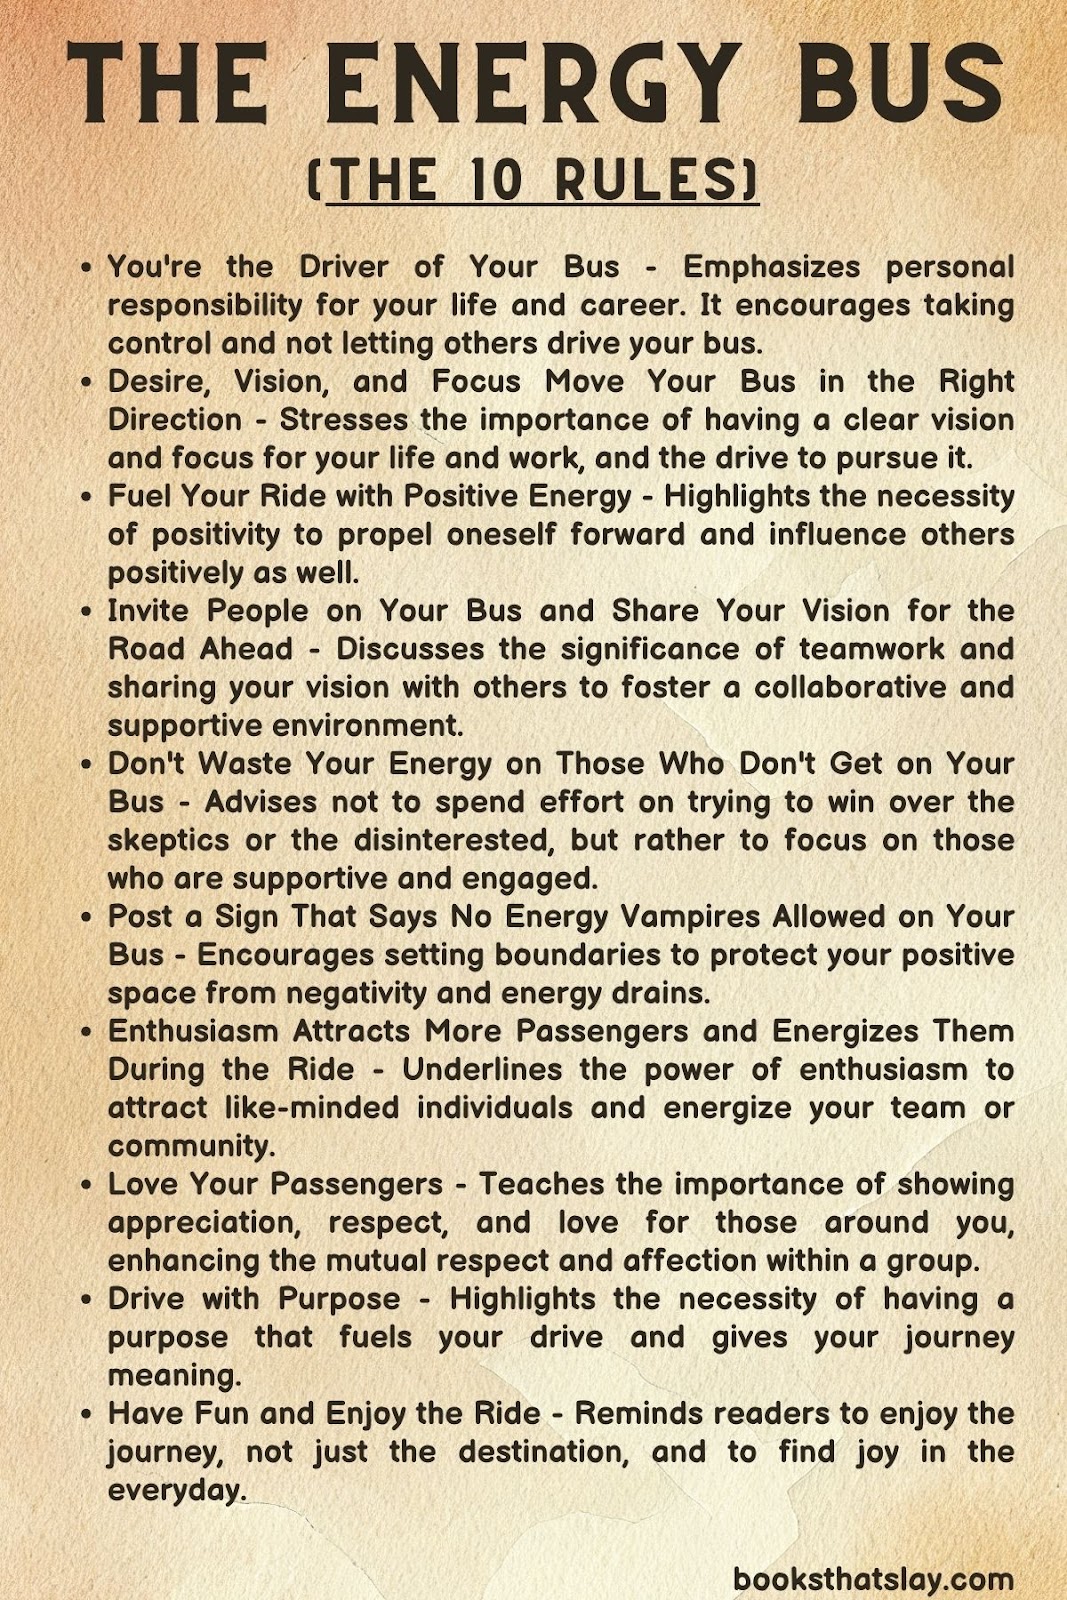 The Energy Bus 10 rules 